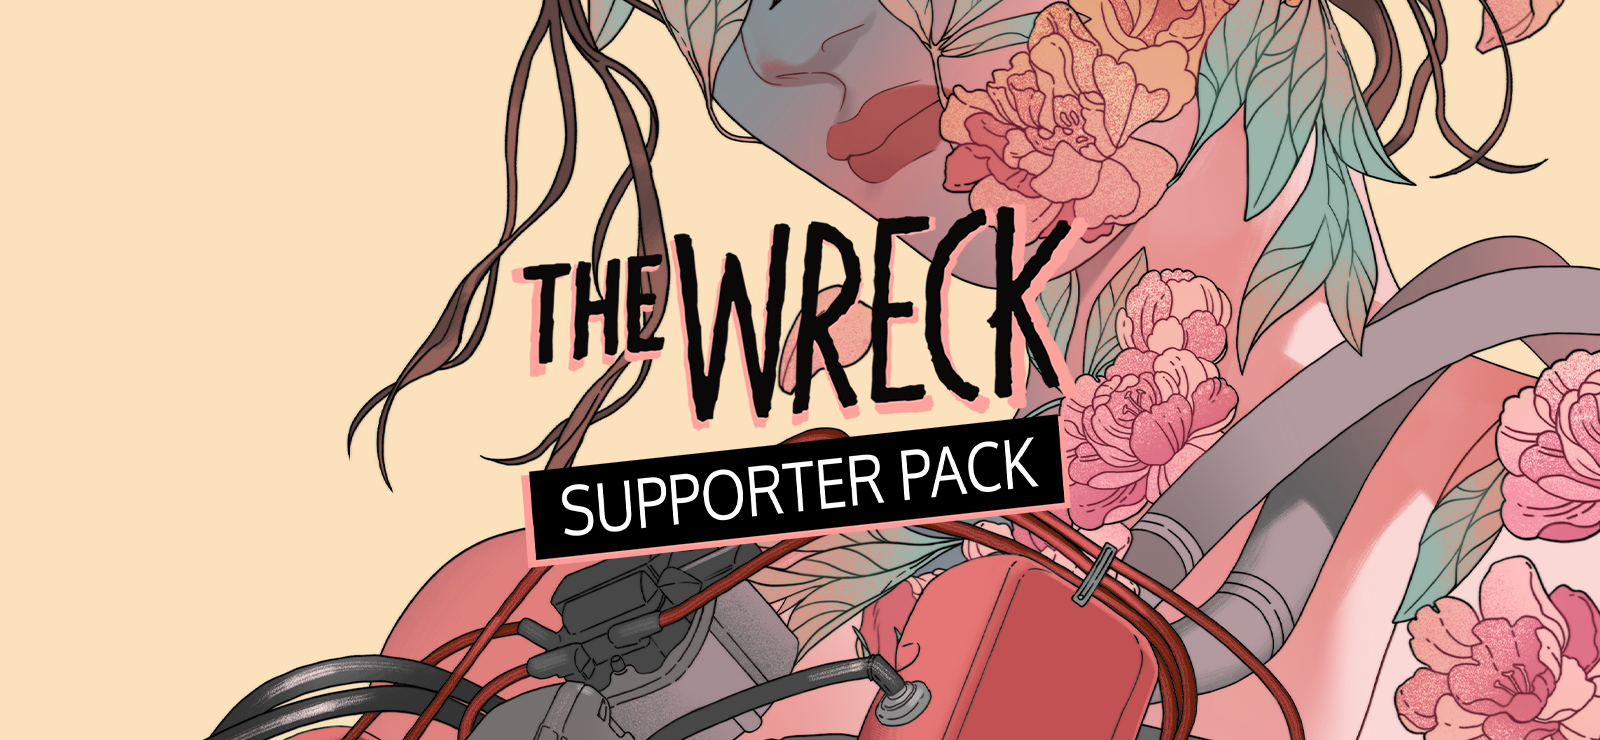 The Wreck - Supporter Pack